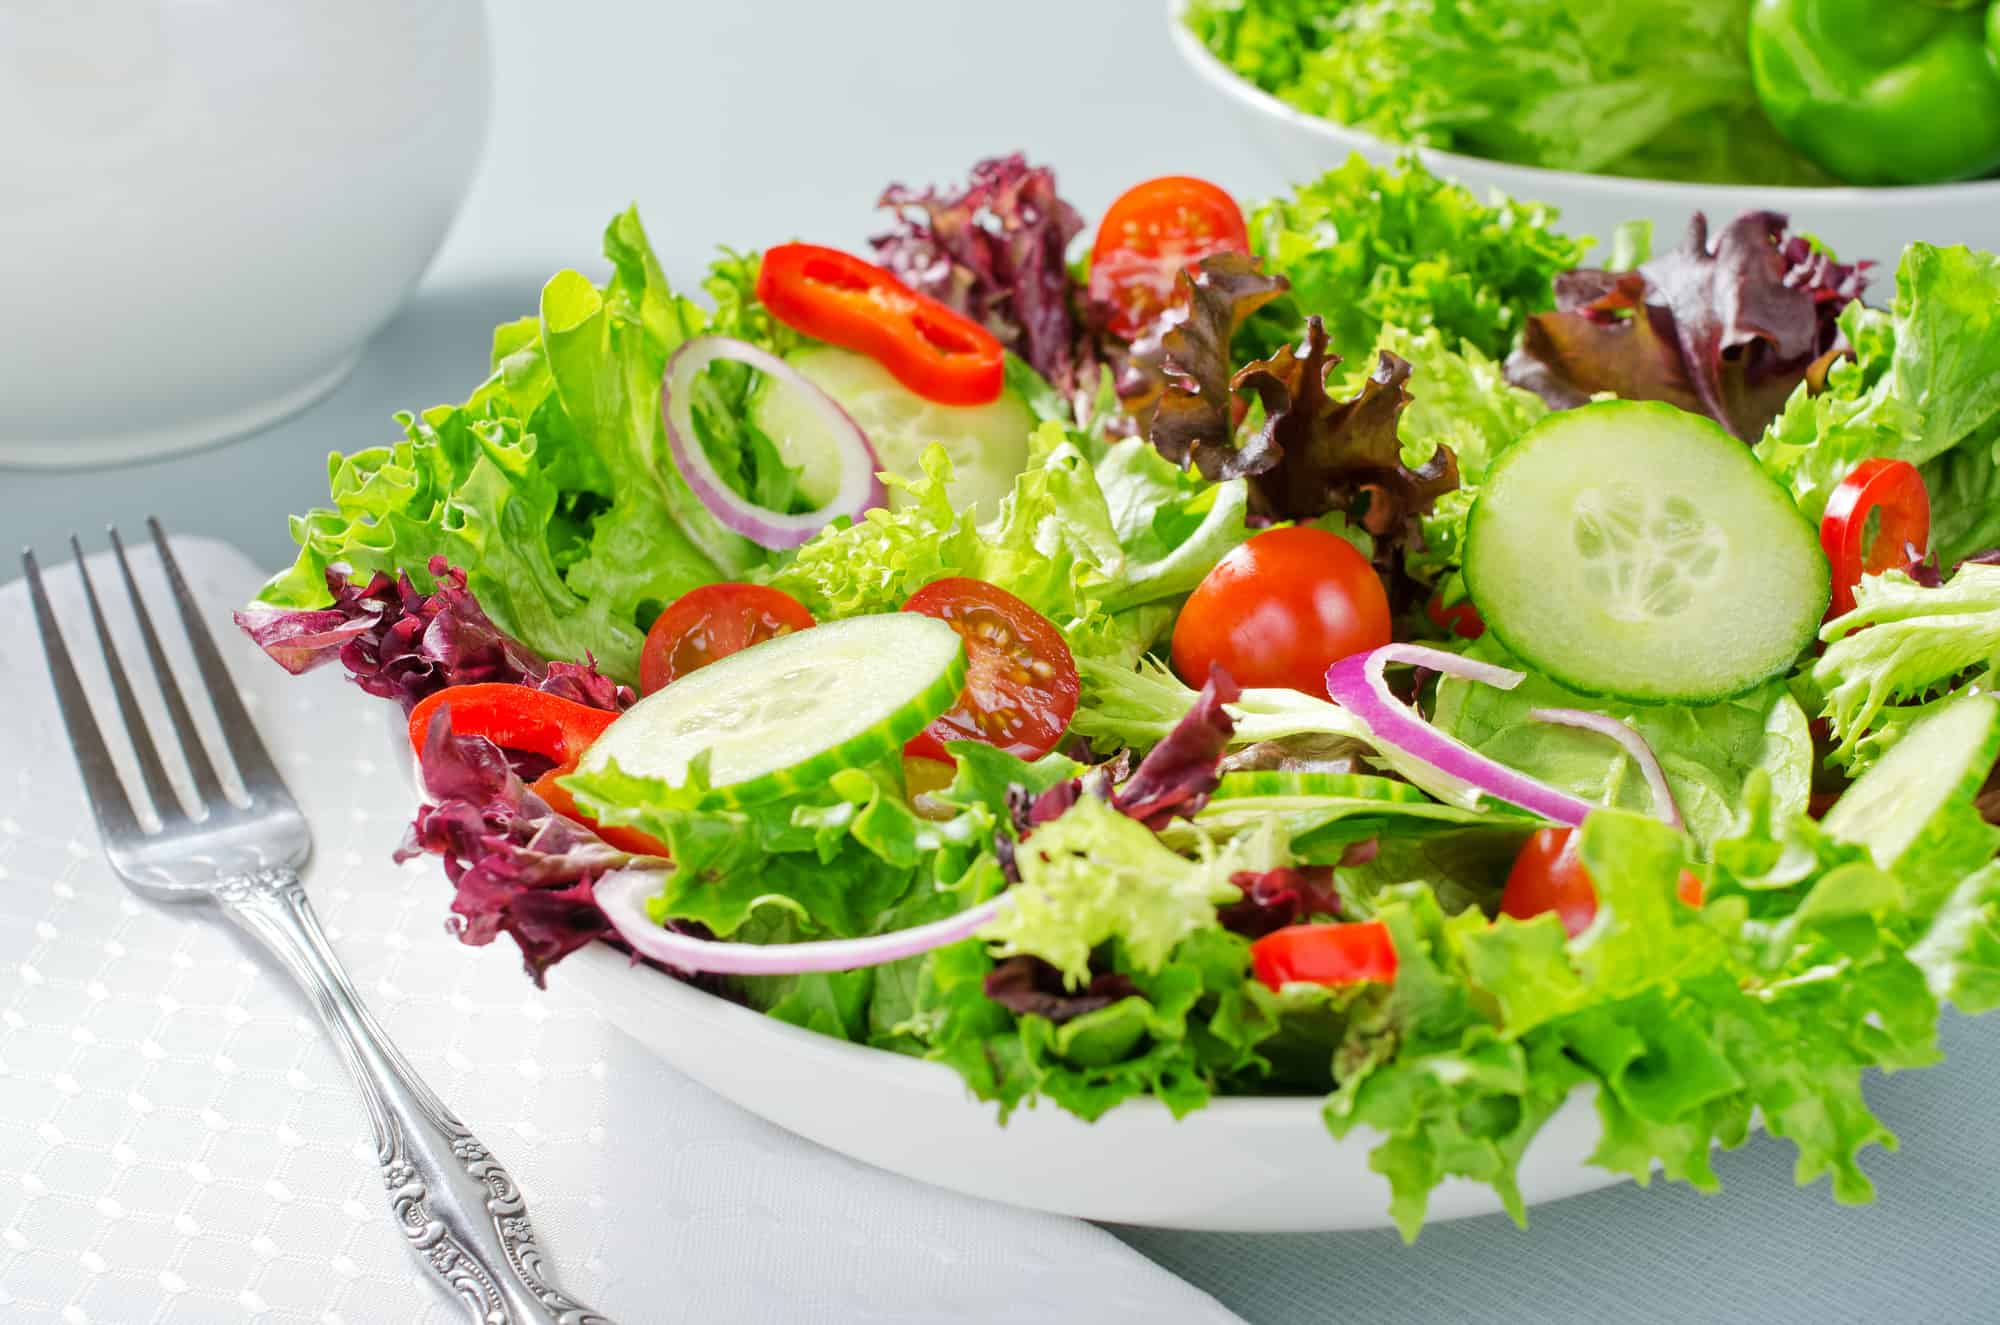 A mixed salad with lettuce, cucumber, tomatoes, red pepperm and red onion.